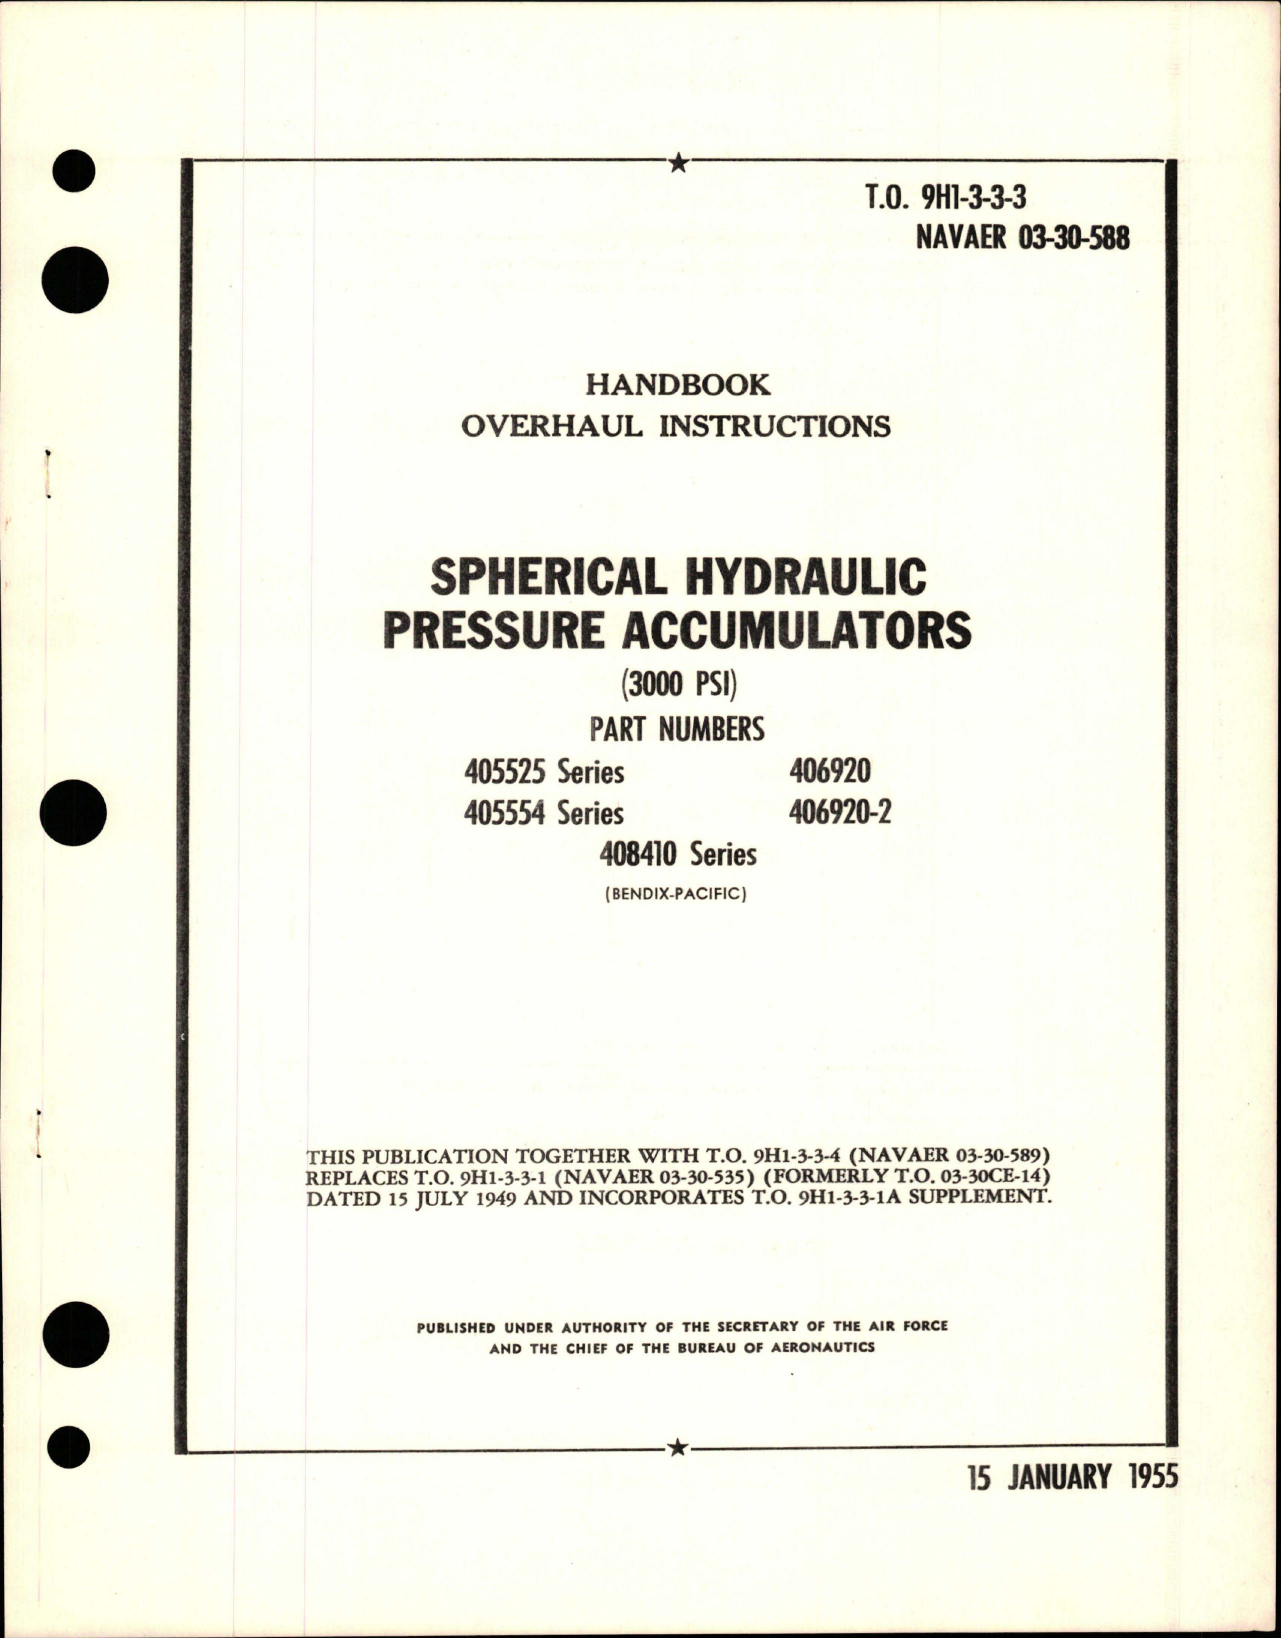 Sample page 1 from AirCorps Library document: Overhaul Instructions for Spherical Hydraulic Pressure Accumulators - 3000 PSI - Parts 405525, 405554, 406920, 406920-2, and 408410